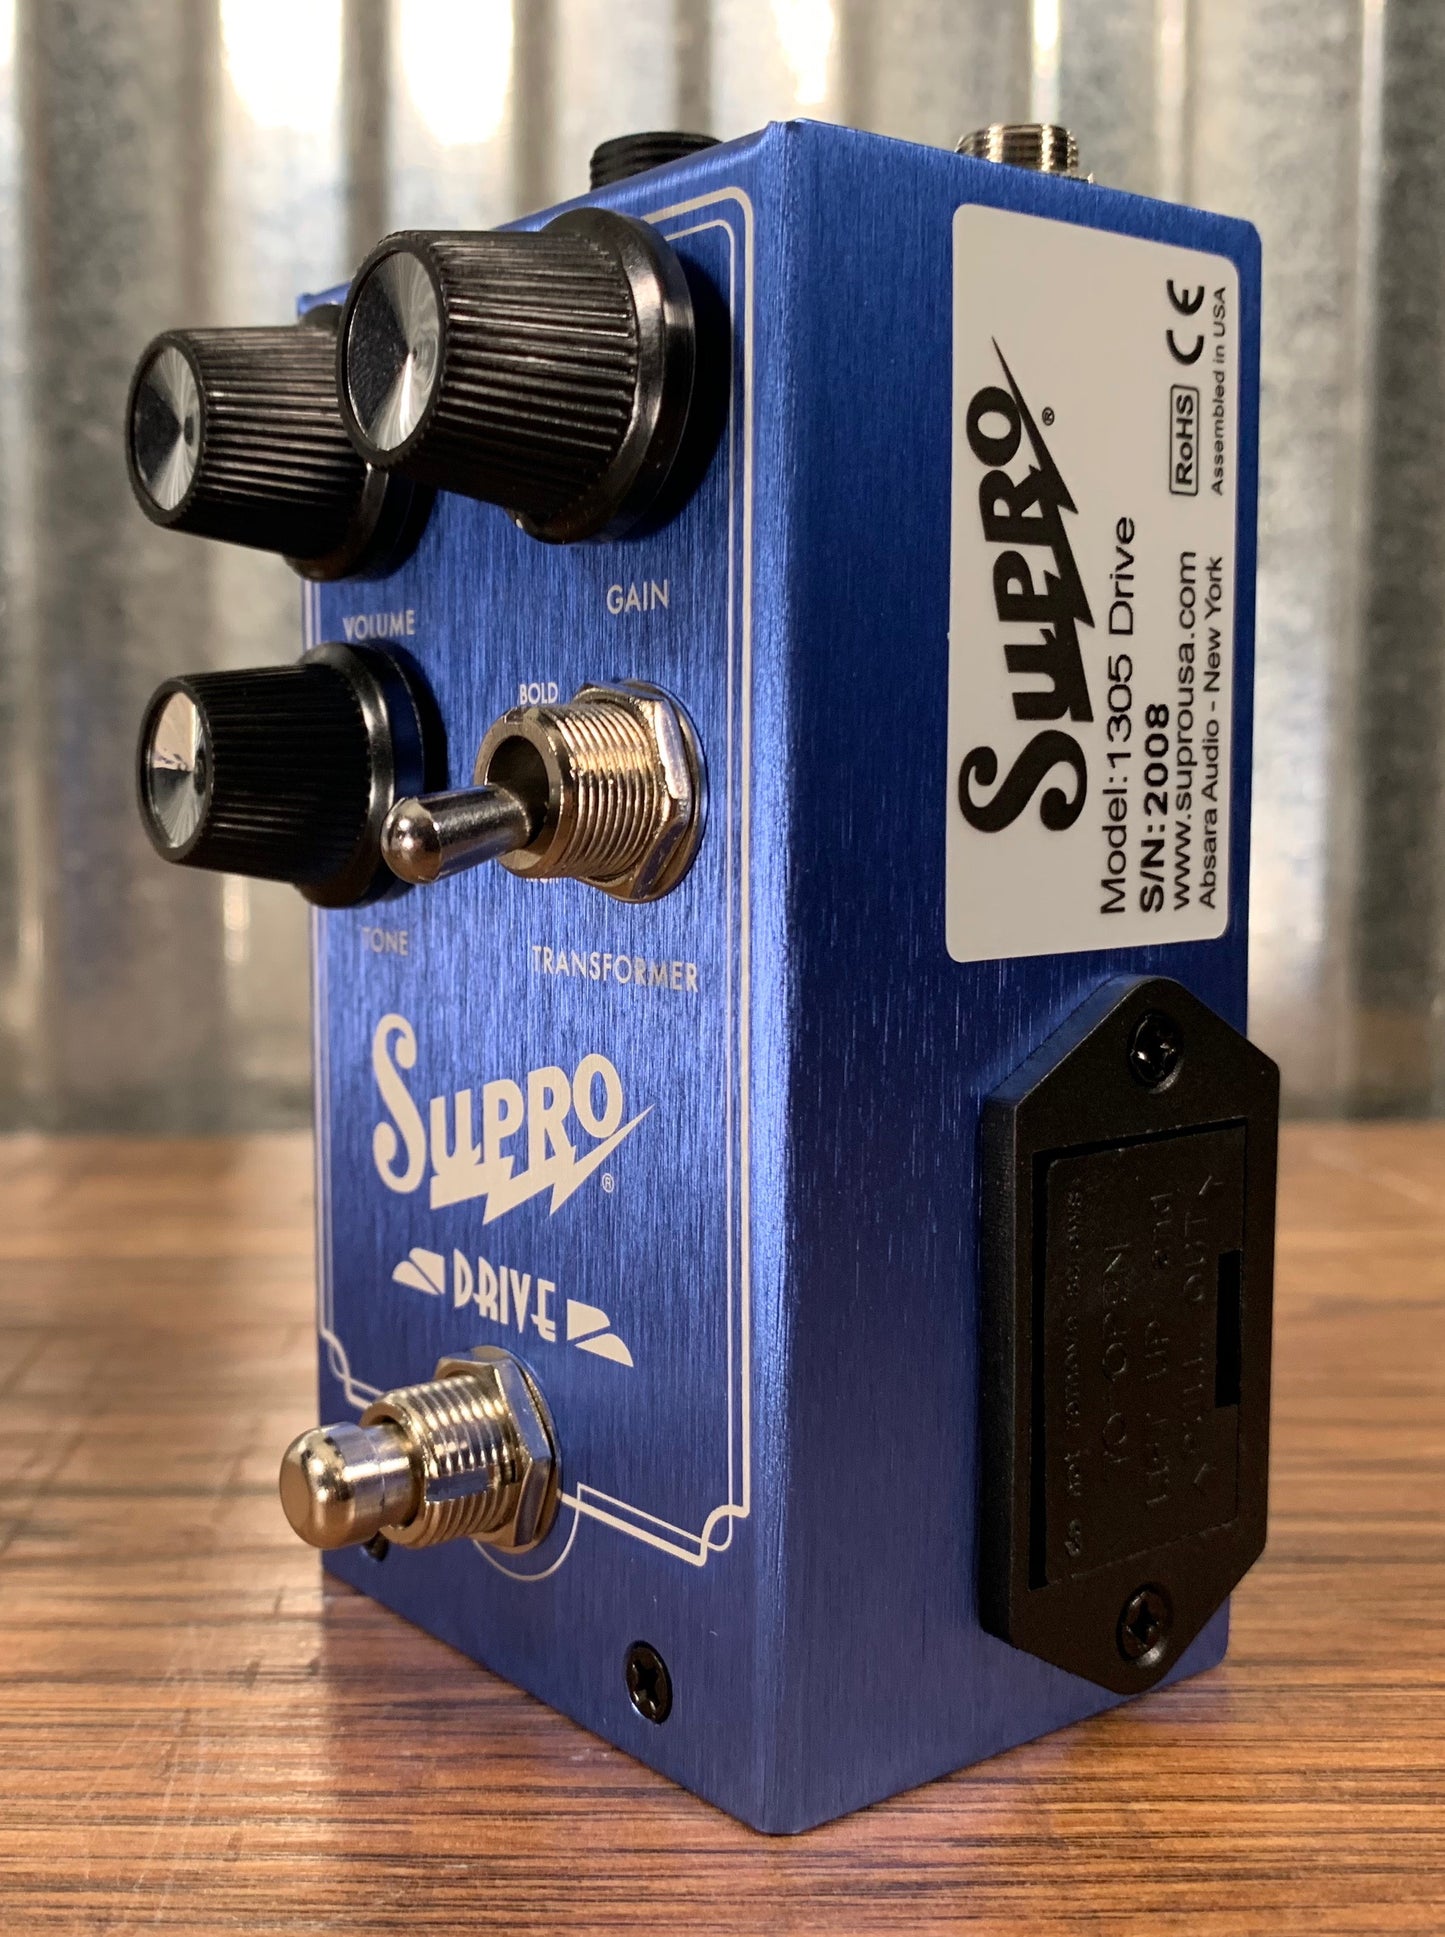 Supro USA 1305 Drive Overdrive Guitar Bass Effect Pedal Demo